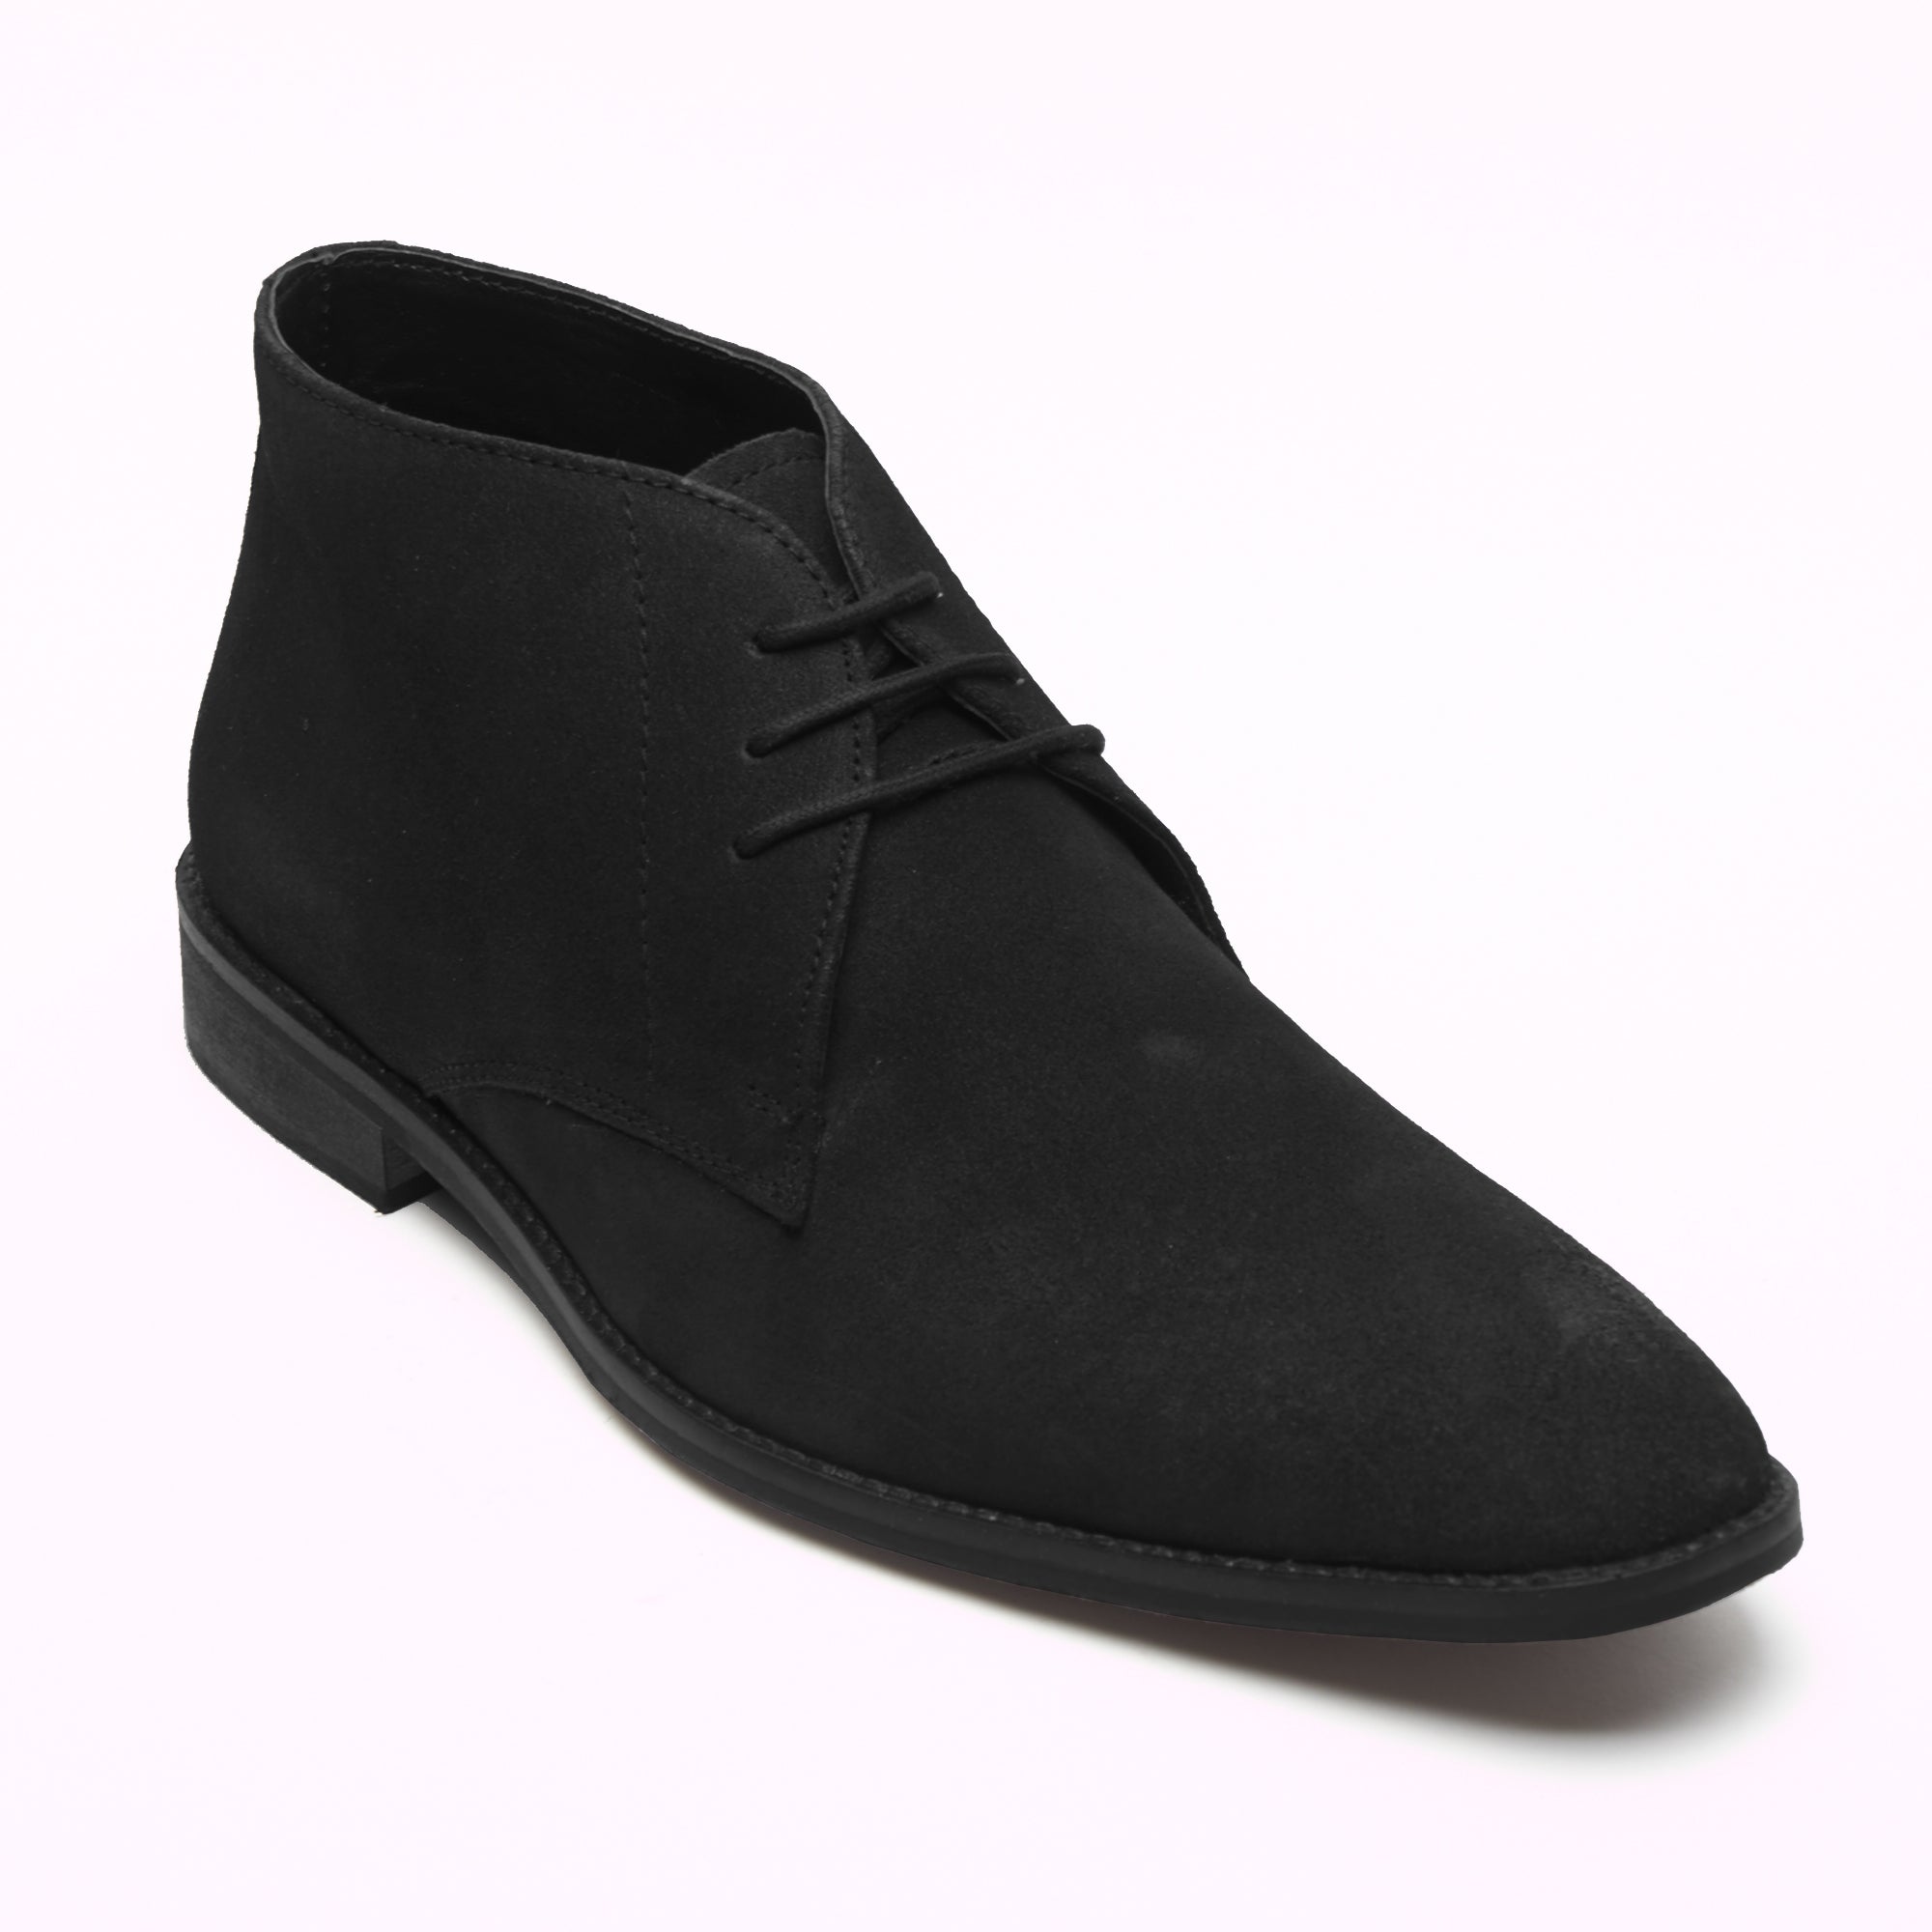 Mens Suede Ankle Boots - SF-251-Suede Black